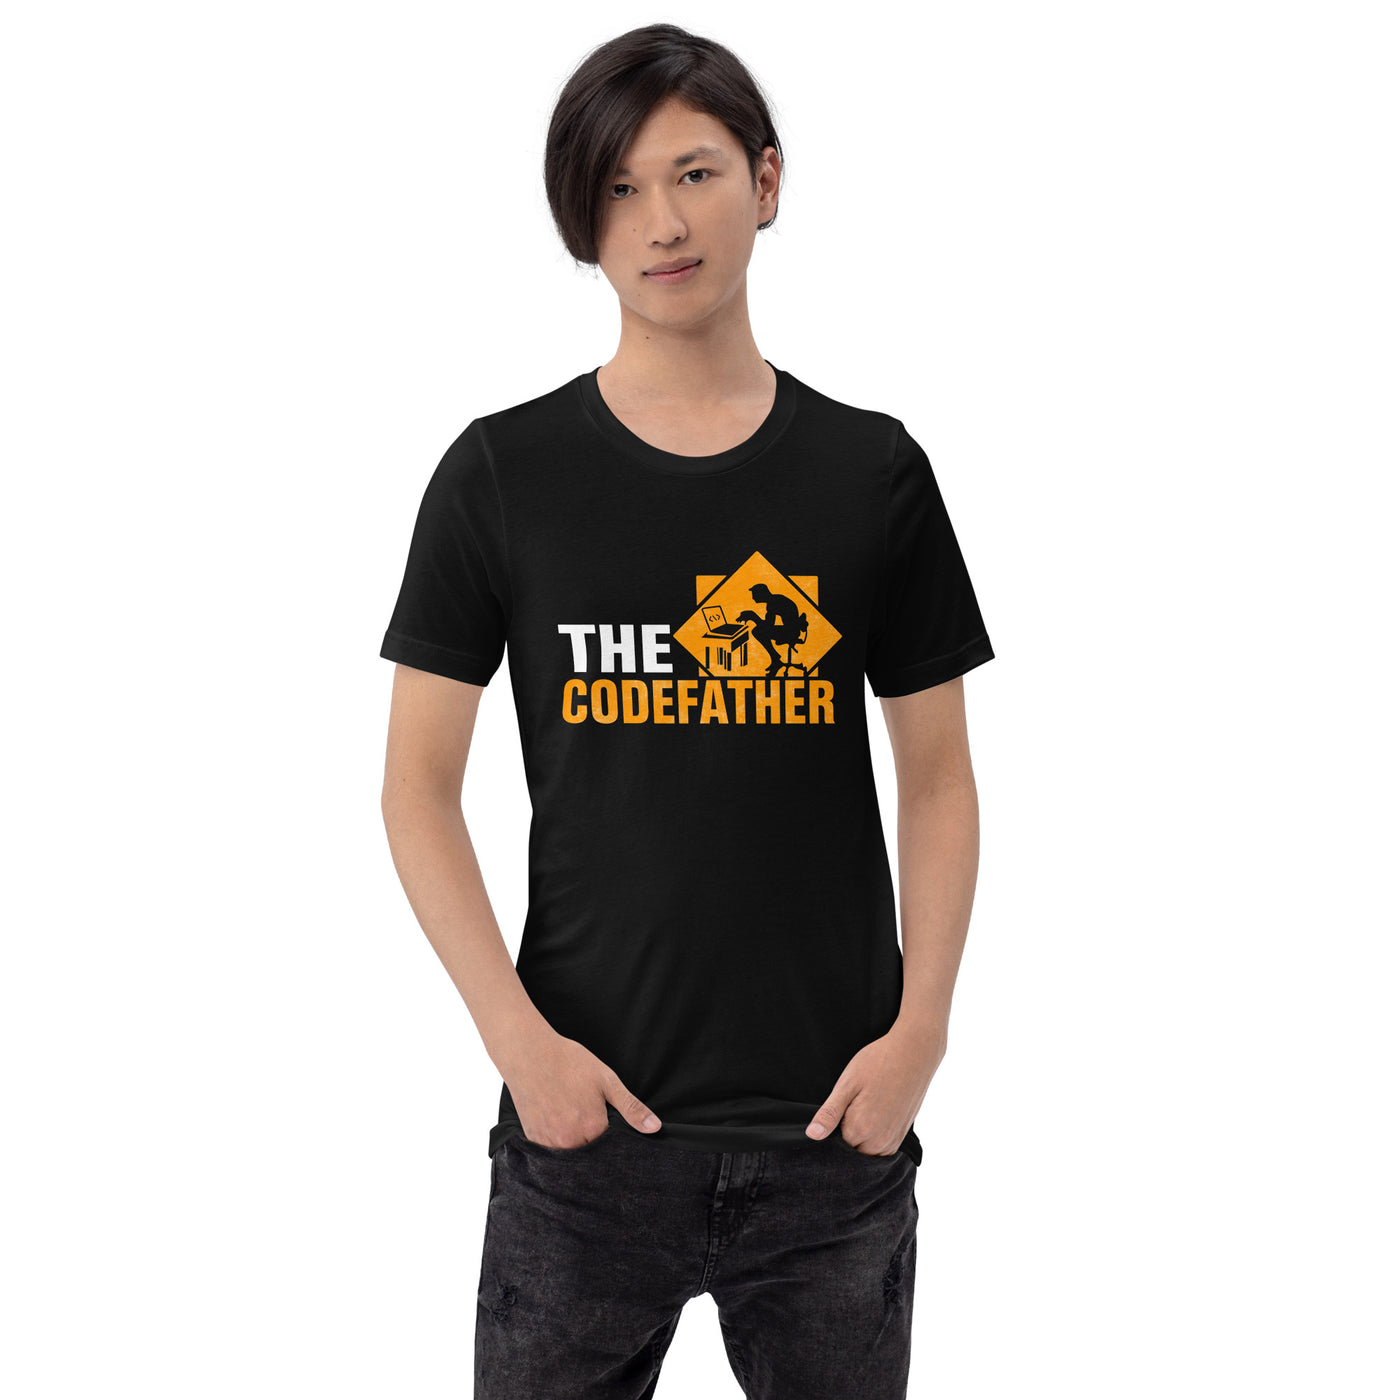 The Code Father Unisex t-shirt